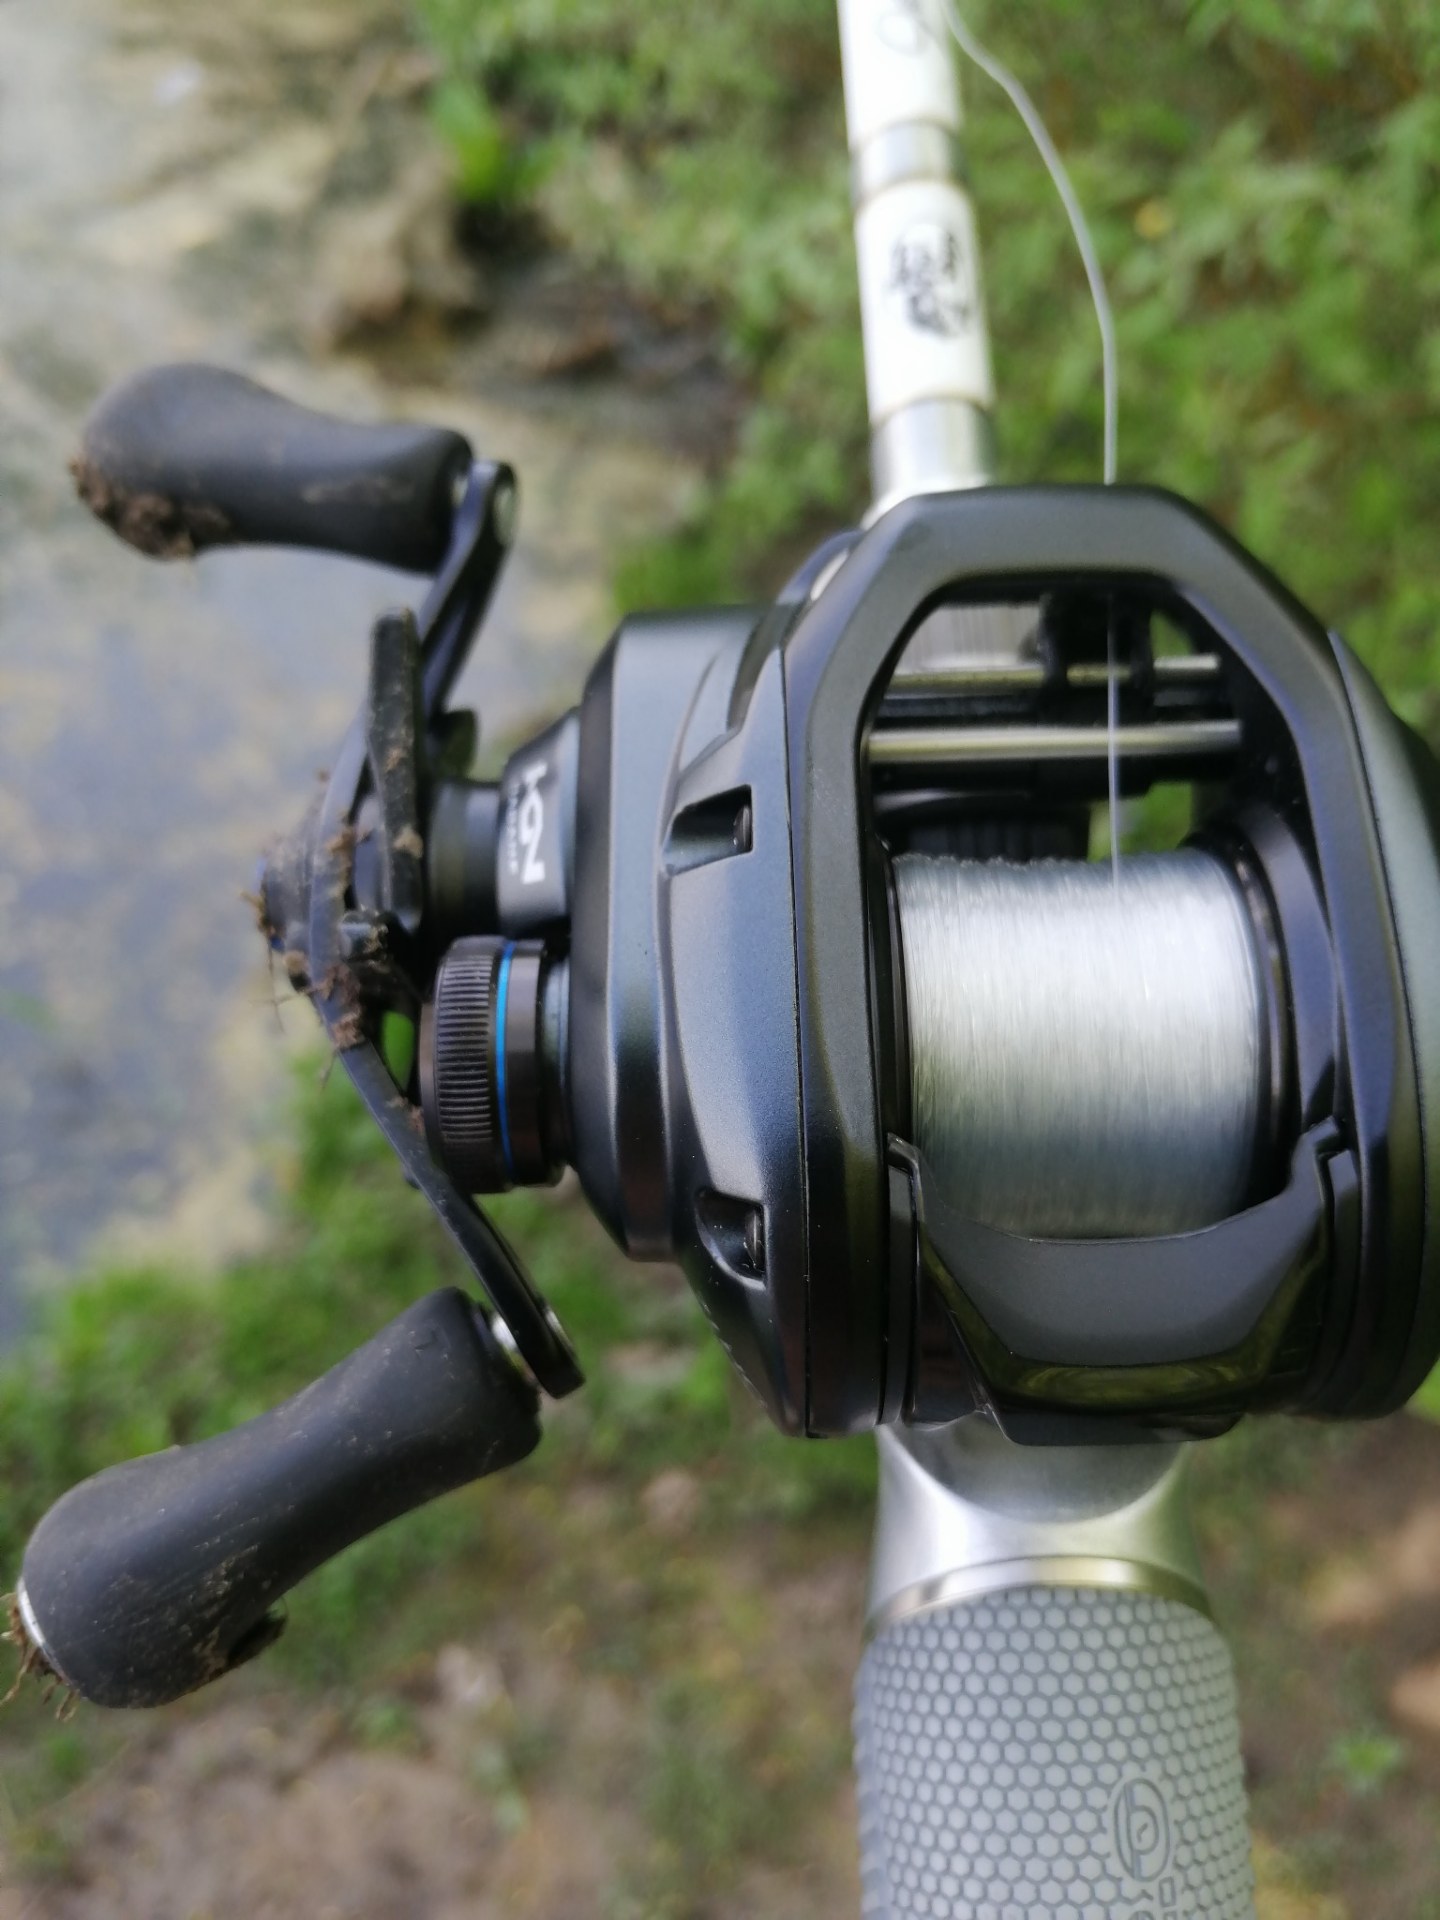 Need replacement handle for SLX MGL - Fishing Rods, Reels, Line, and Knots  - Bass Fishing Forums